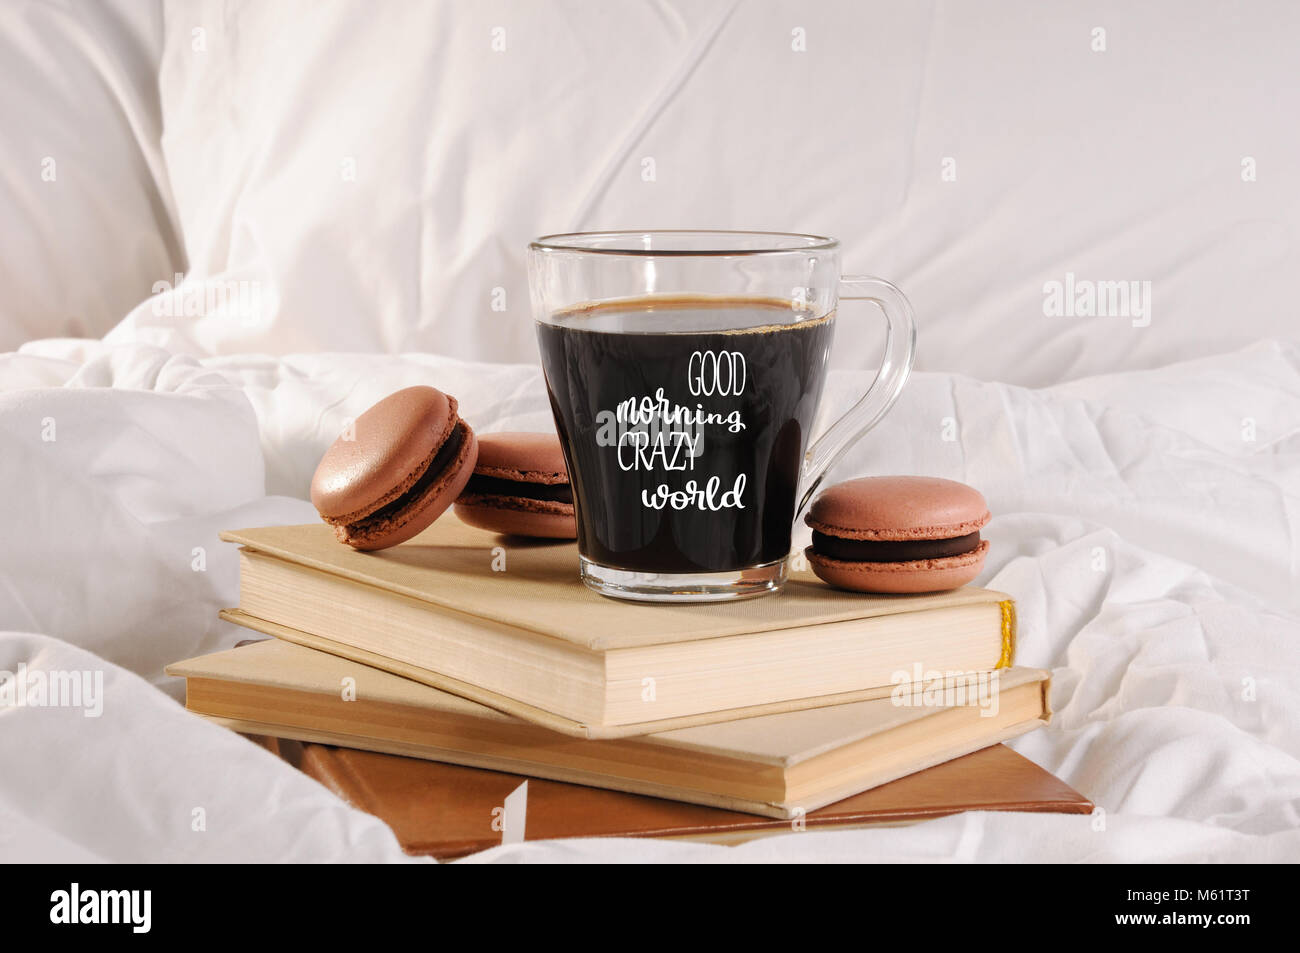 Morning cup of coffee with chocolate cakes Macaroons, on a pile of books in bed.  The inscription on the cup is  «Good morning crazy world». Stock Photo